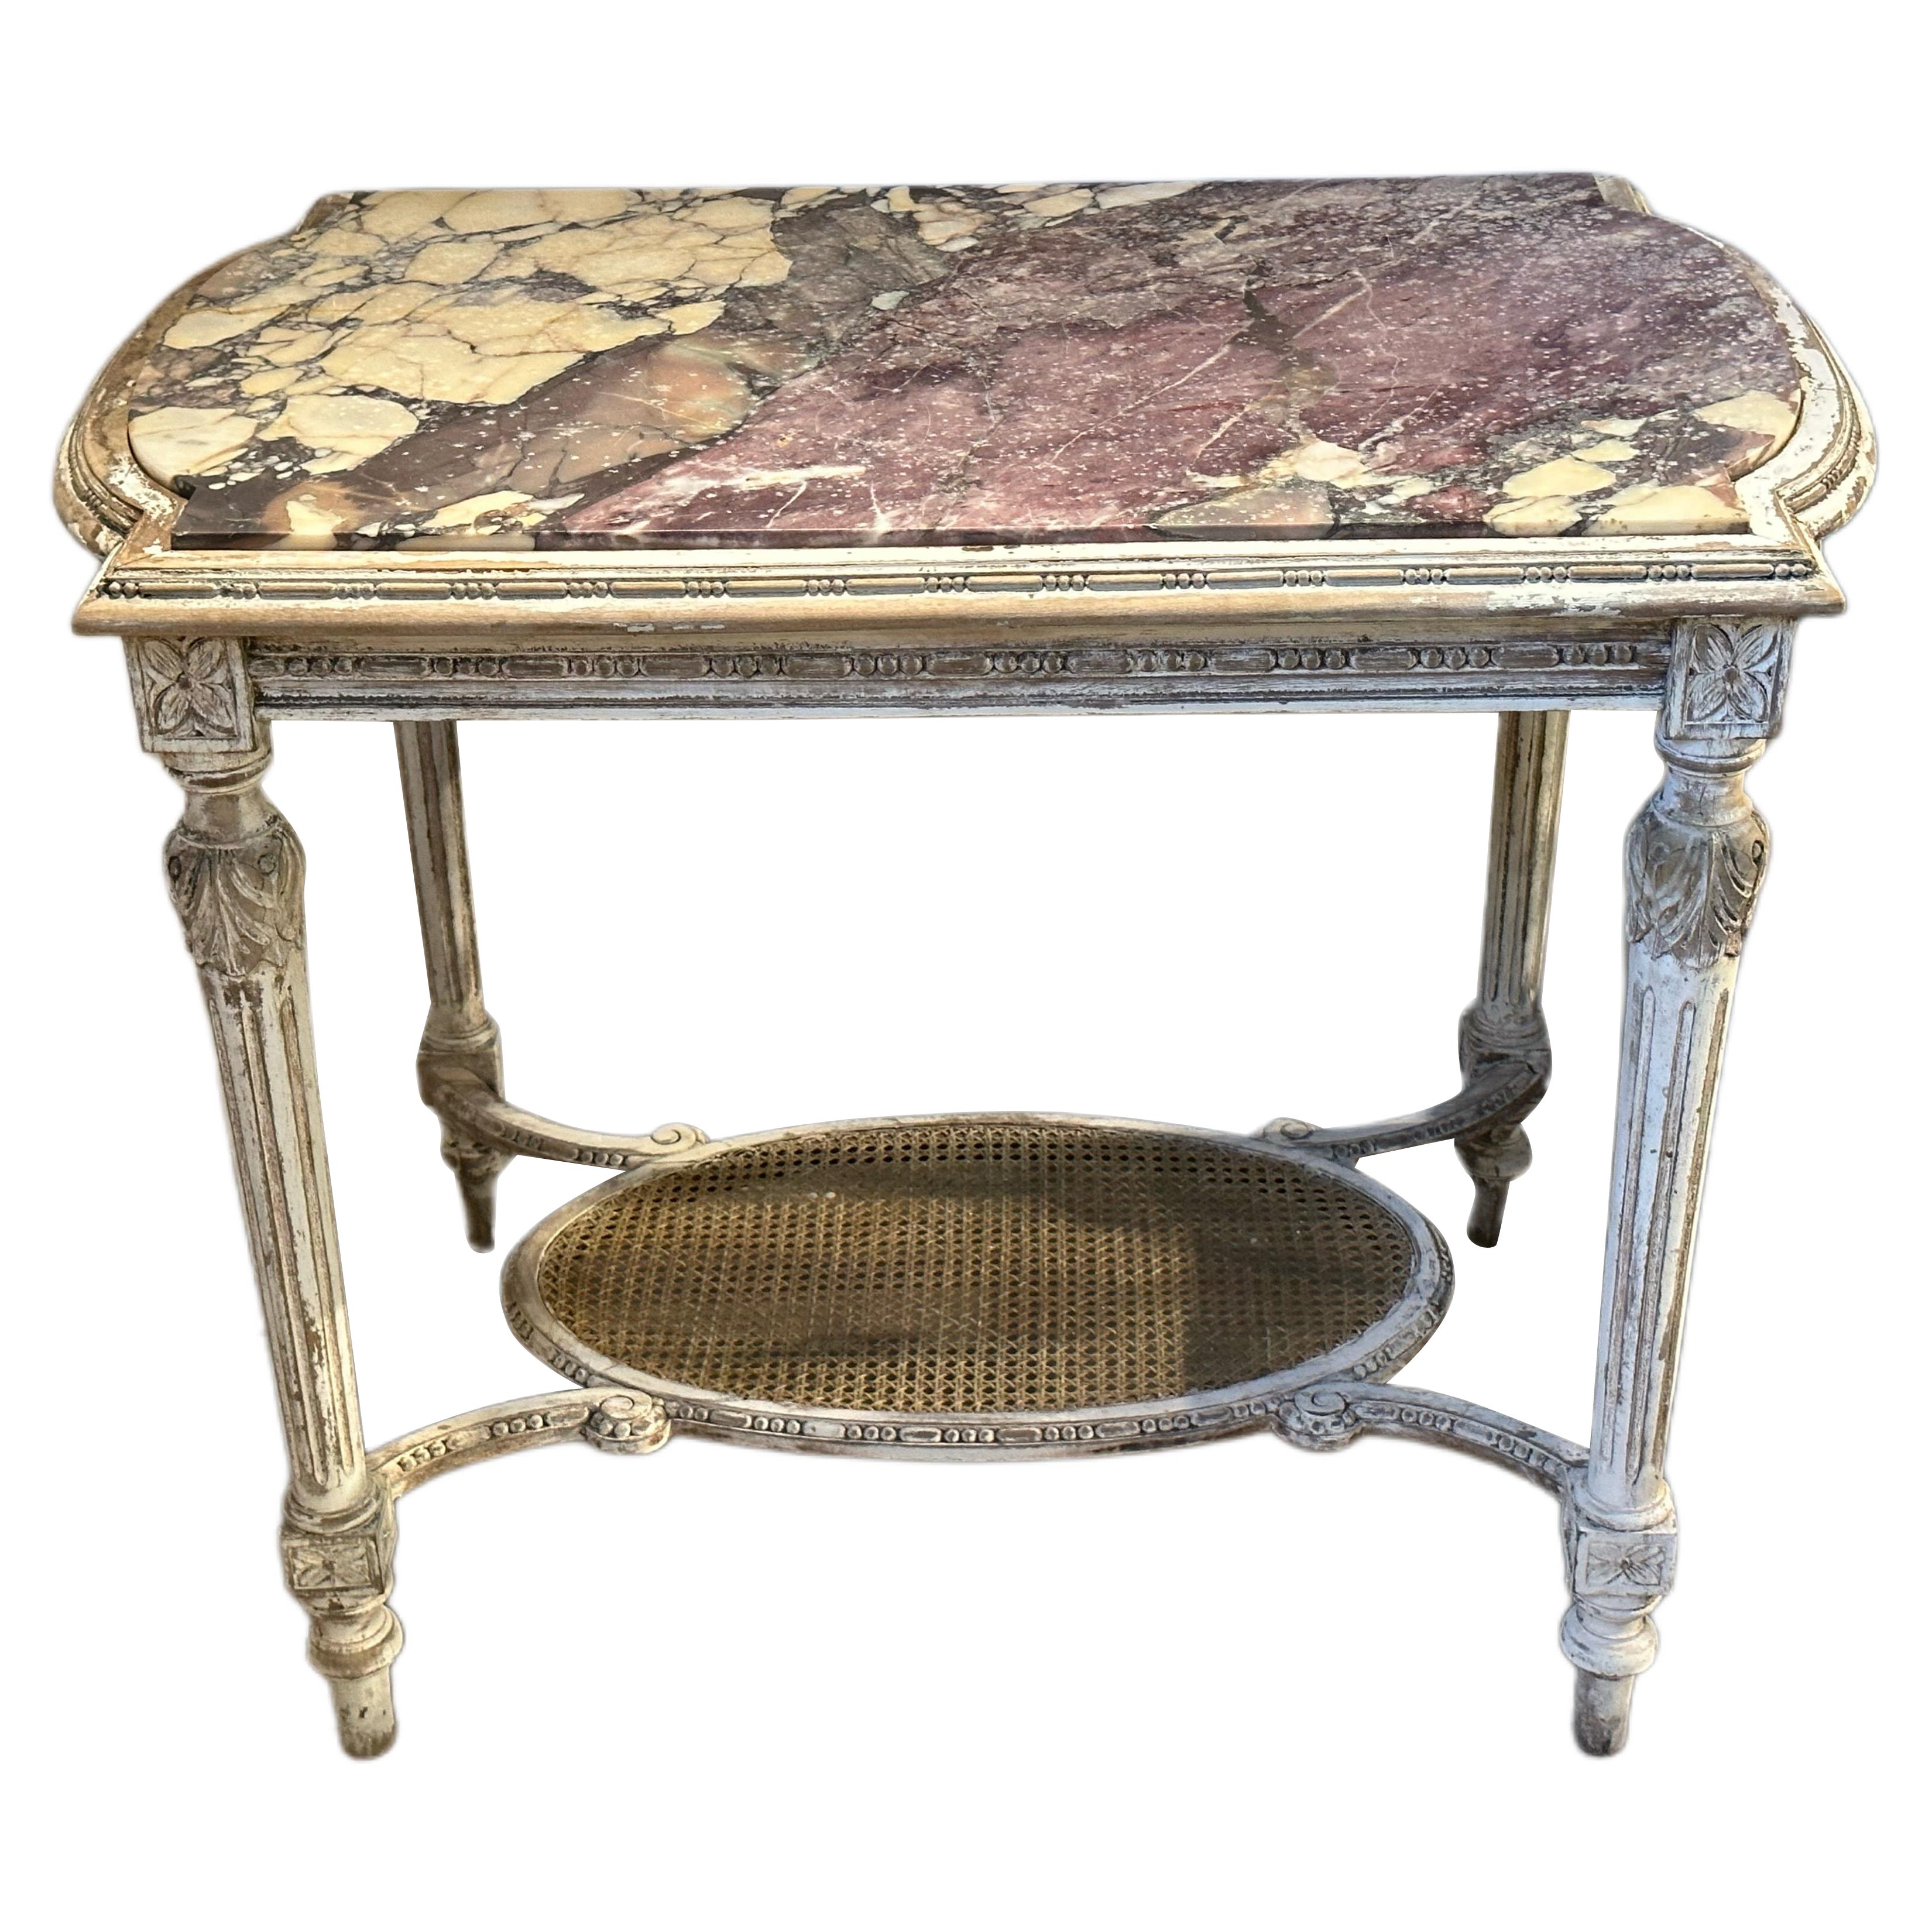 Late 19th/early 20th Century French Louis XVI Center Table or Console